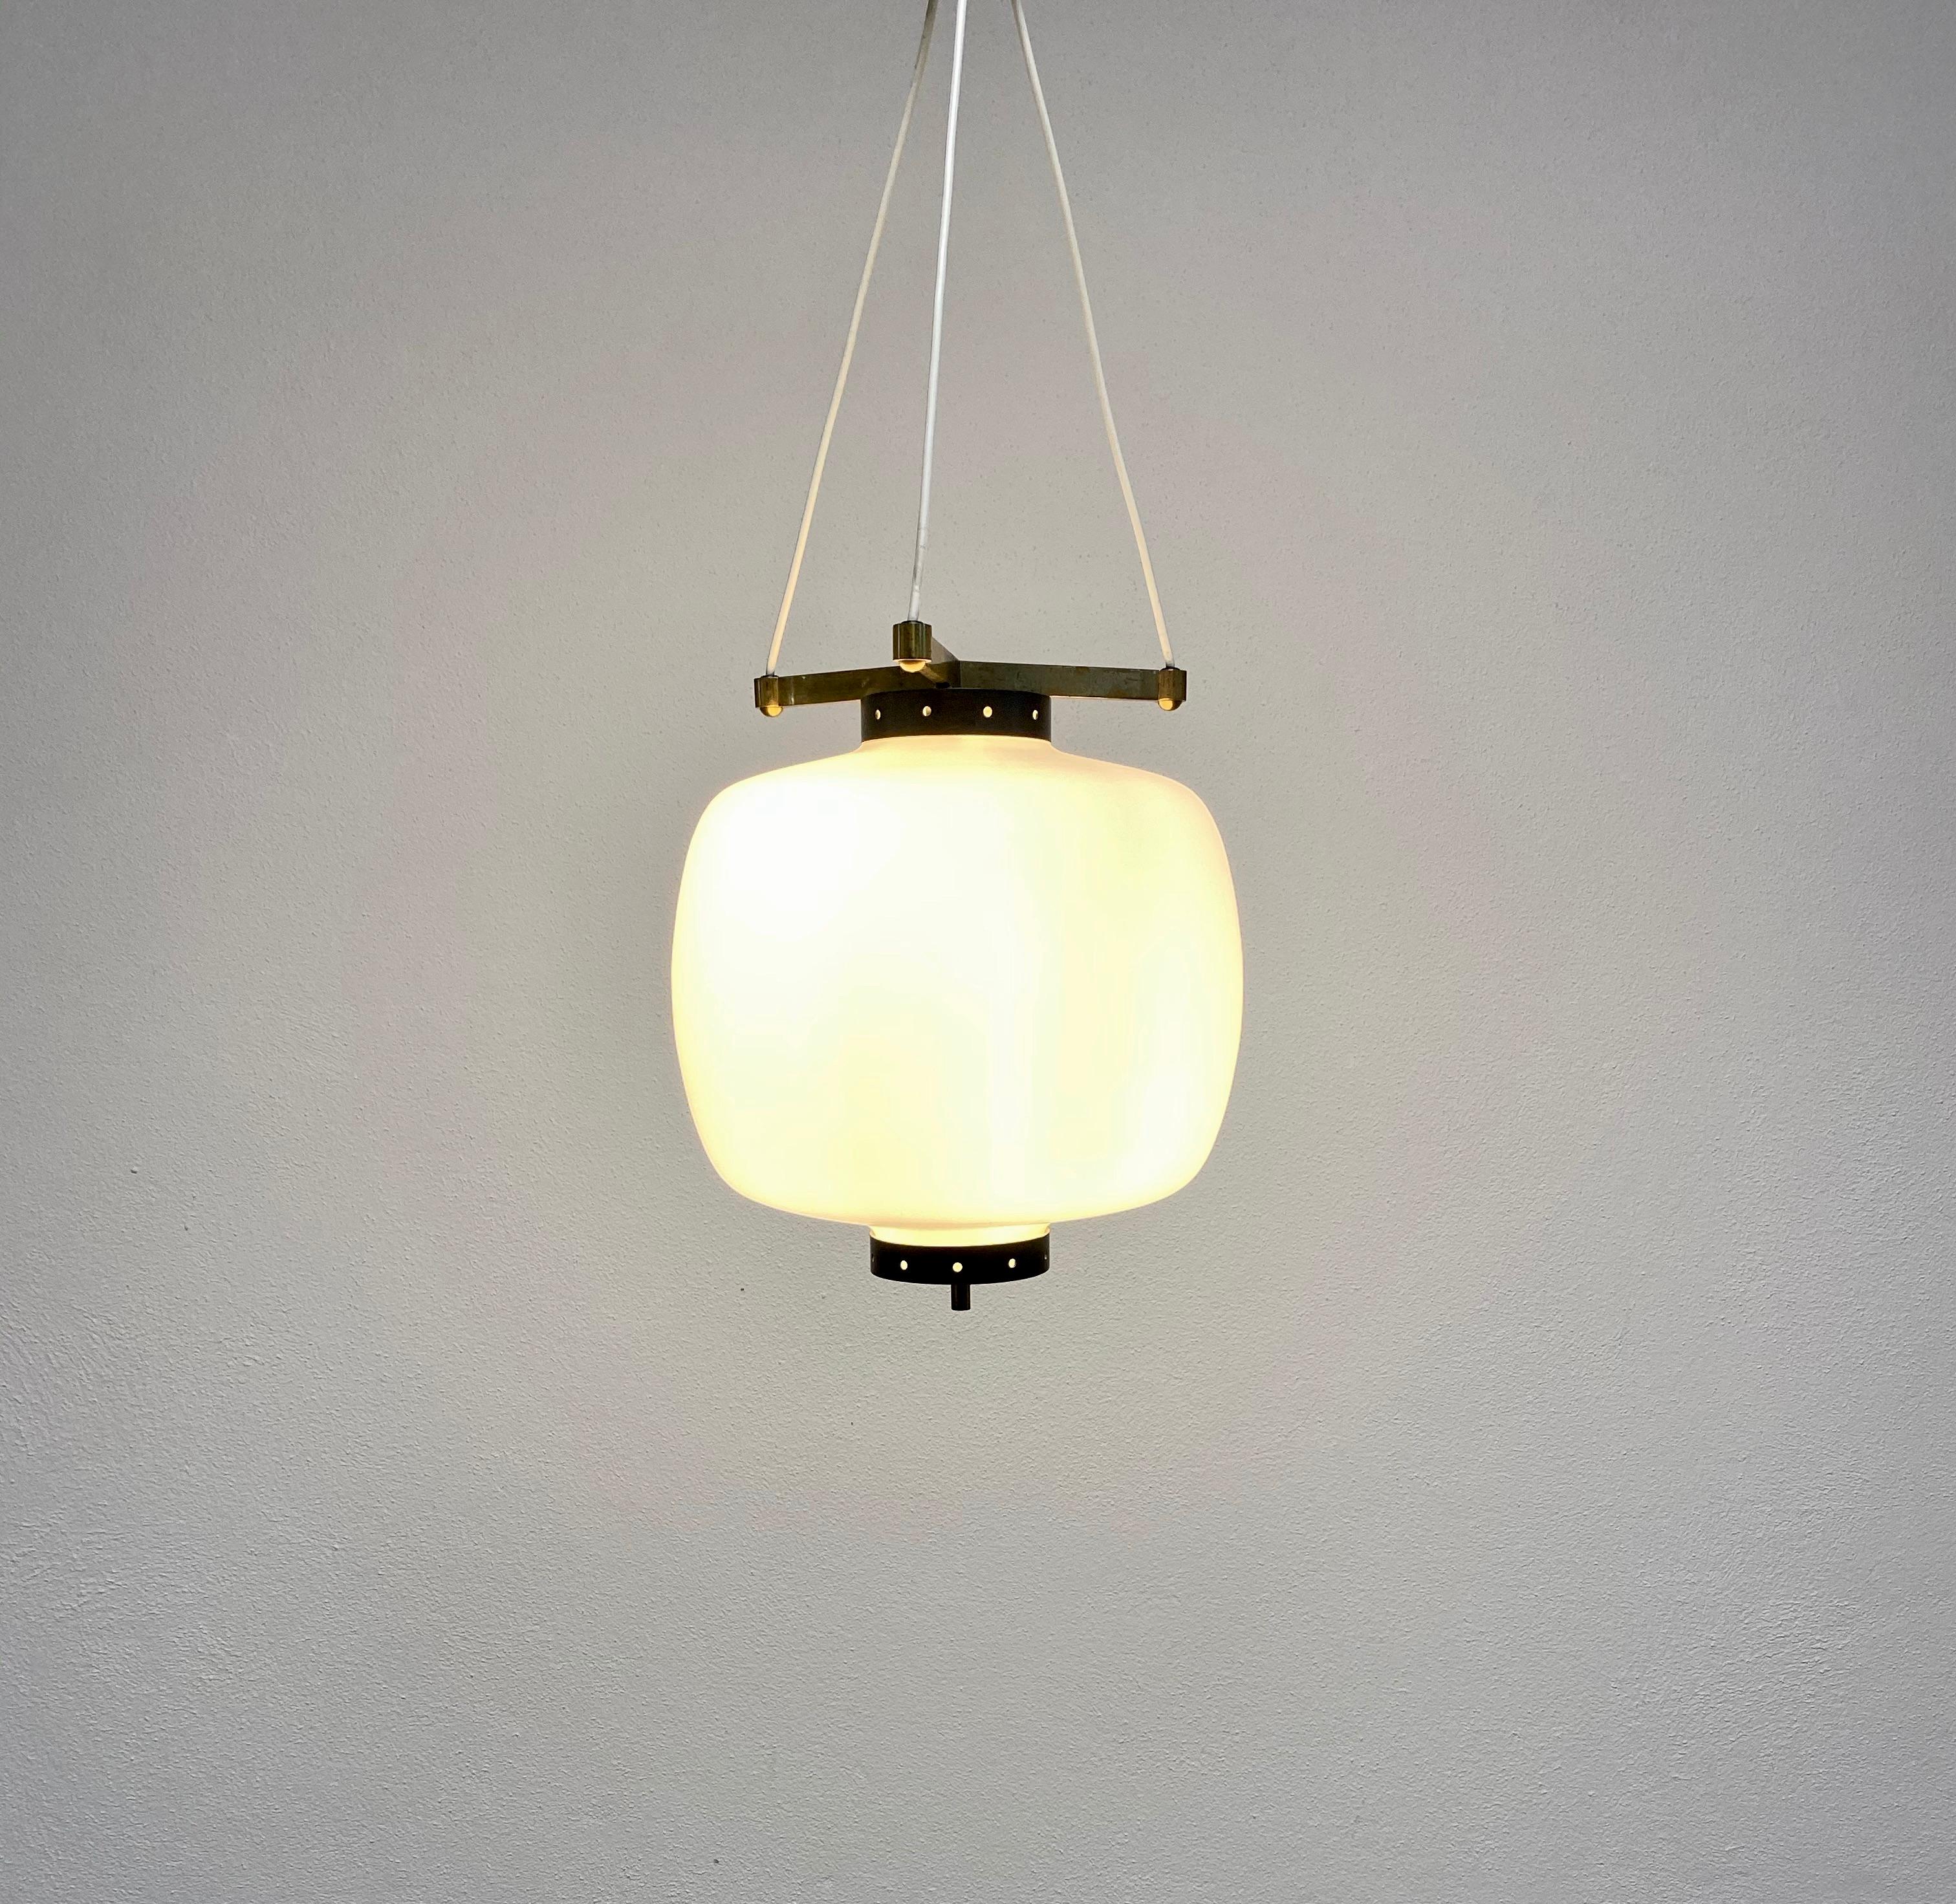 Suspension pendant light with satin glass and brass hardware by Stilnovo, Italy, 1950

Elegant suspension pendant lamp with a three-cord suspension and original canopy. The fixture is in original condition with no damages to the glass, fully